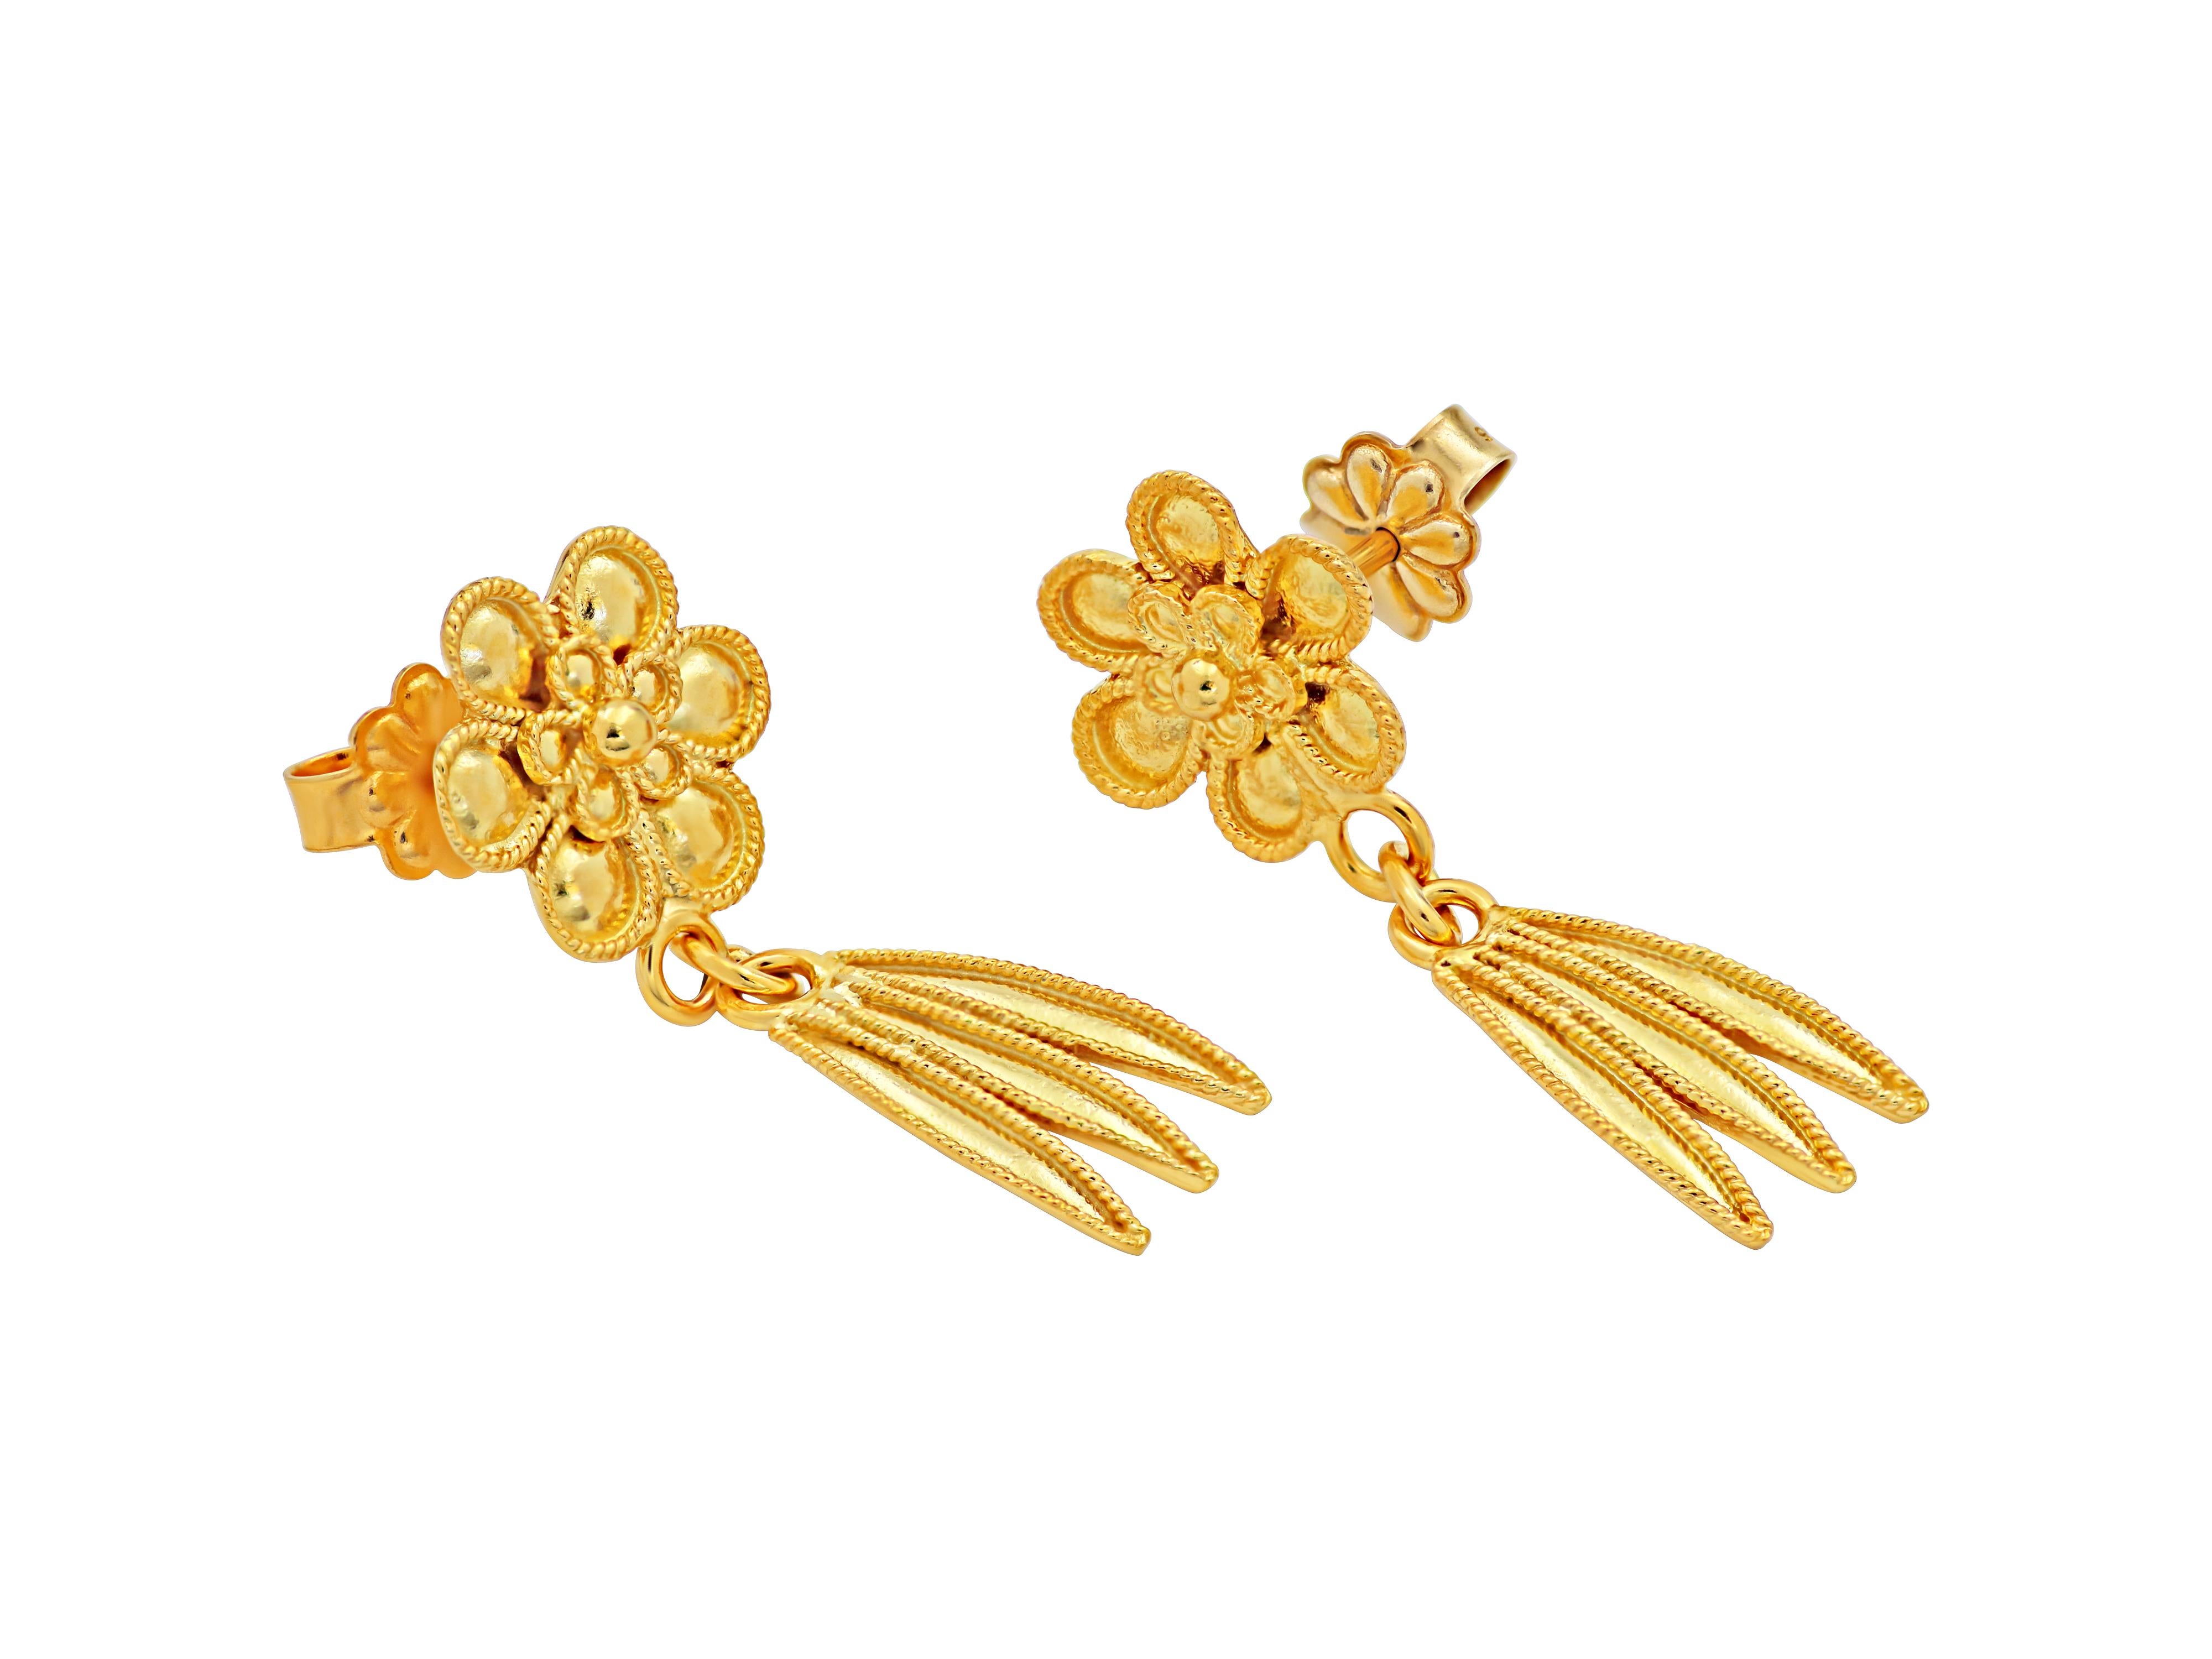 Dangle rosette earrings with Acanthus leaves in 18k yellow gold. A neoclassical museum style work that shows class taste and knowledge.